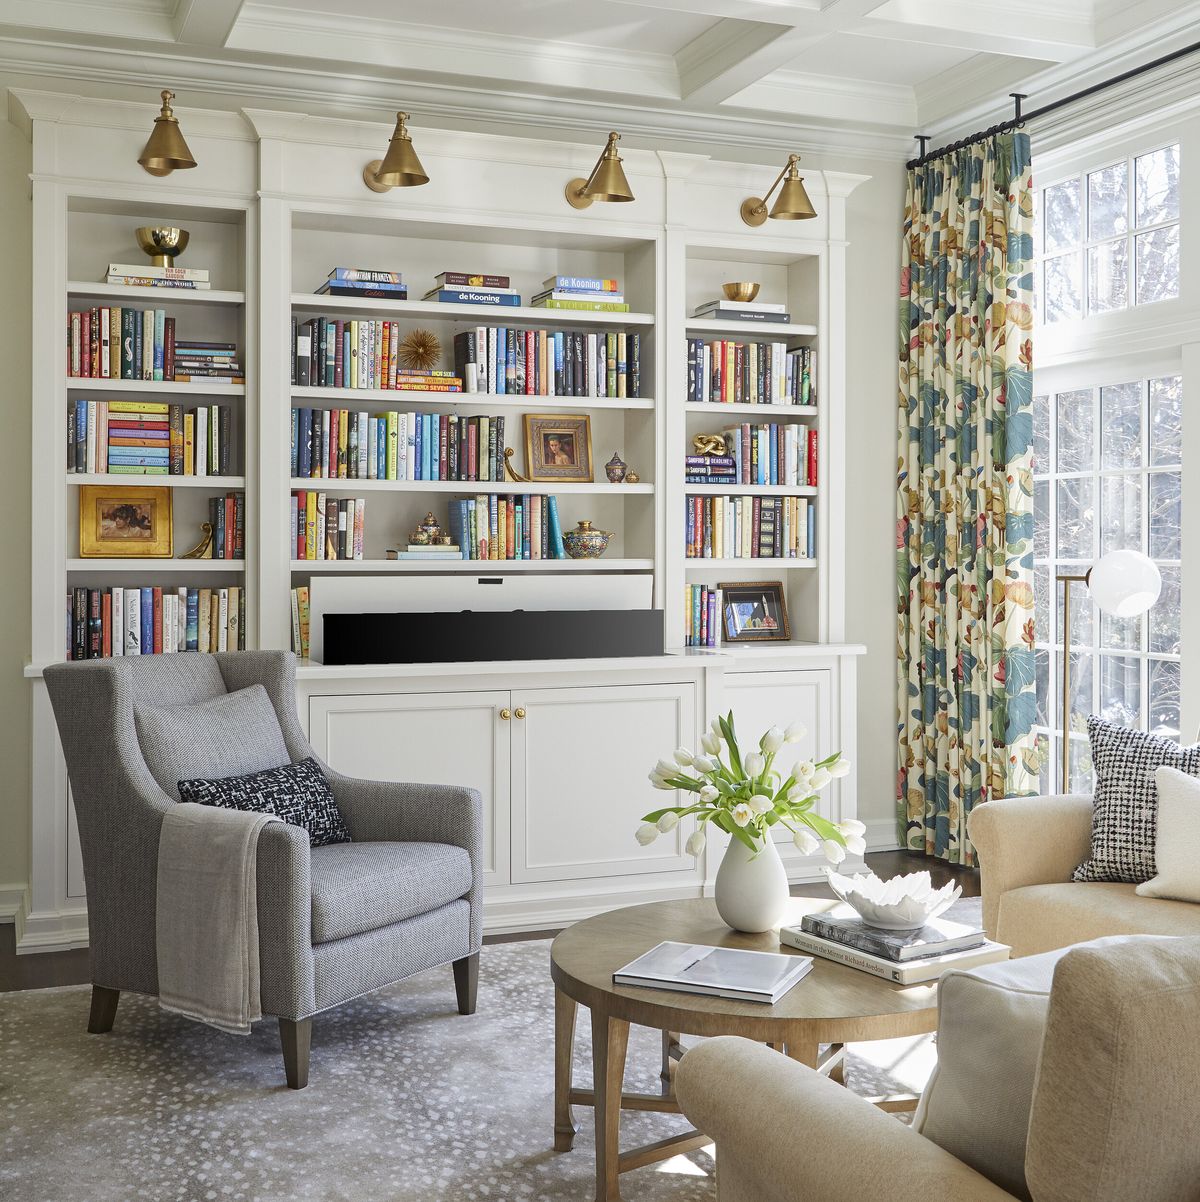 Best Coffee Table Books to Style Shelves